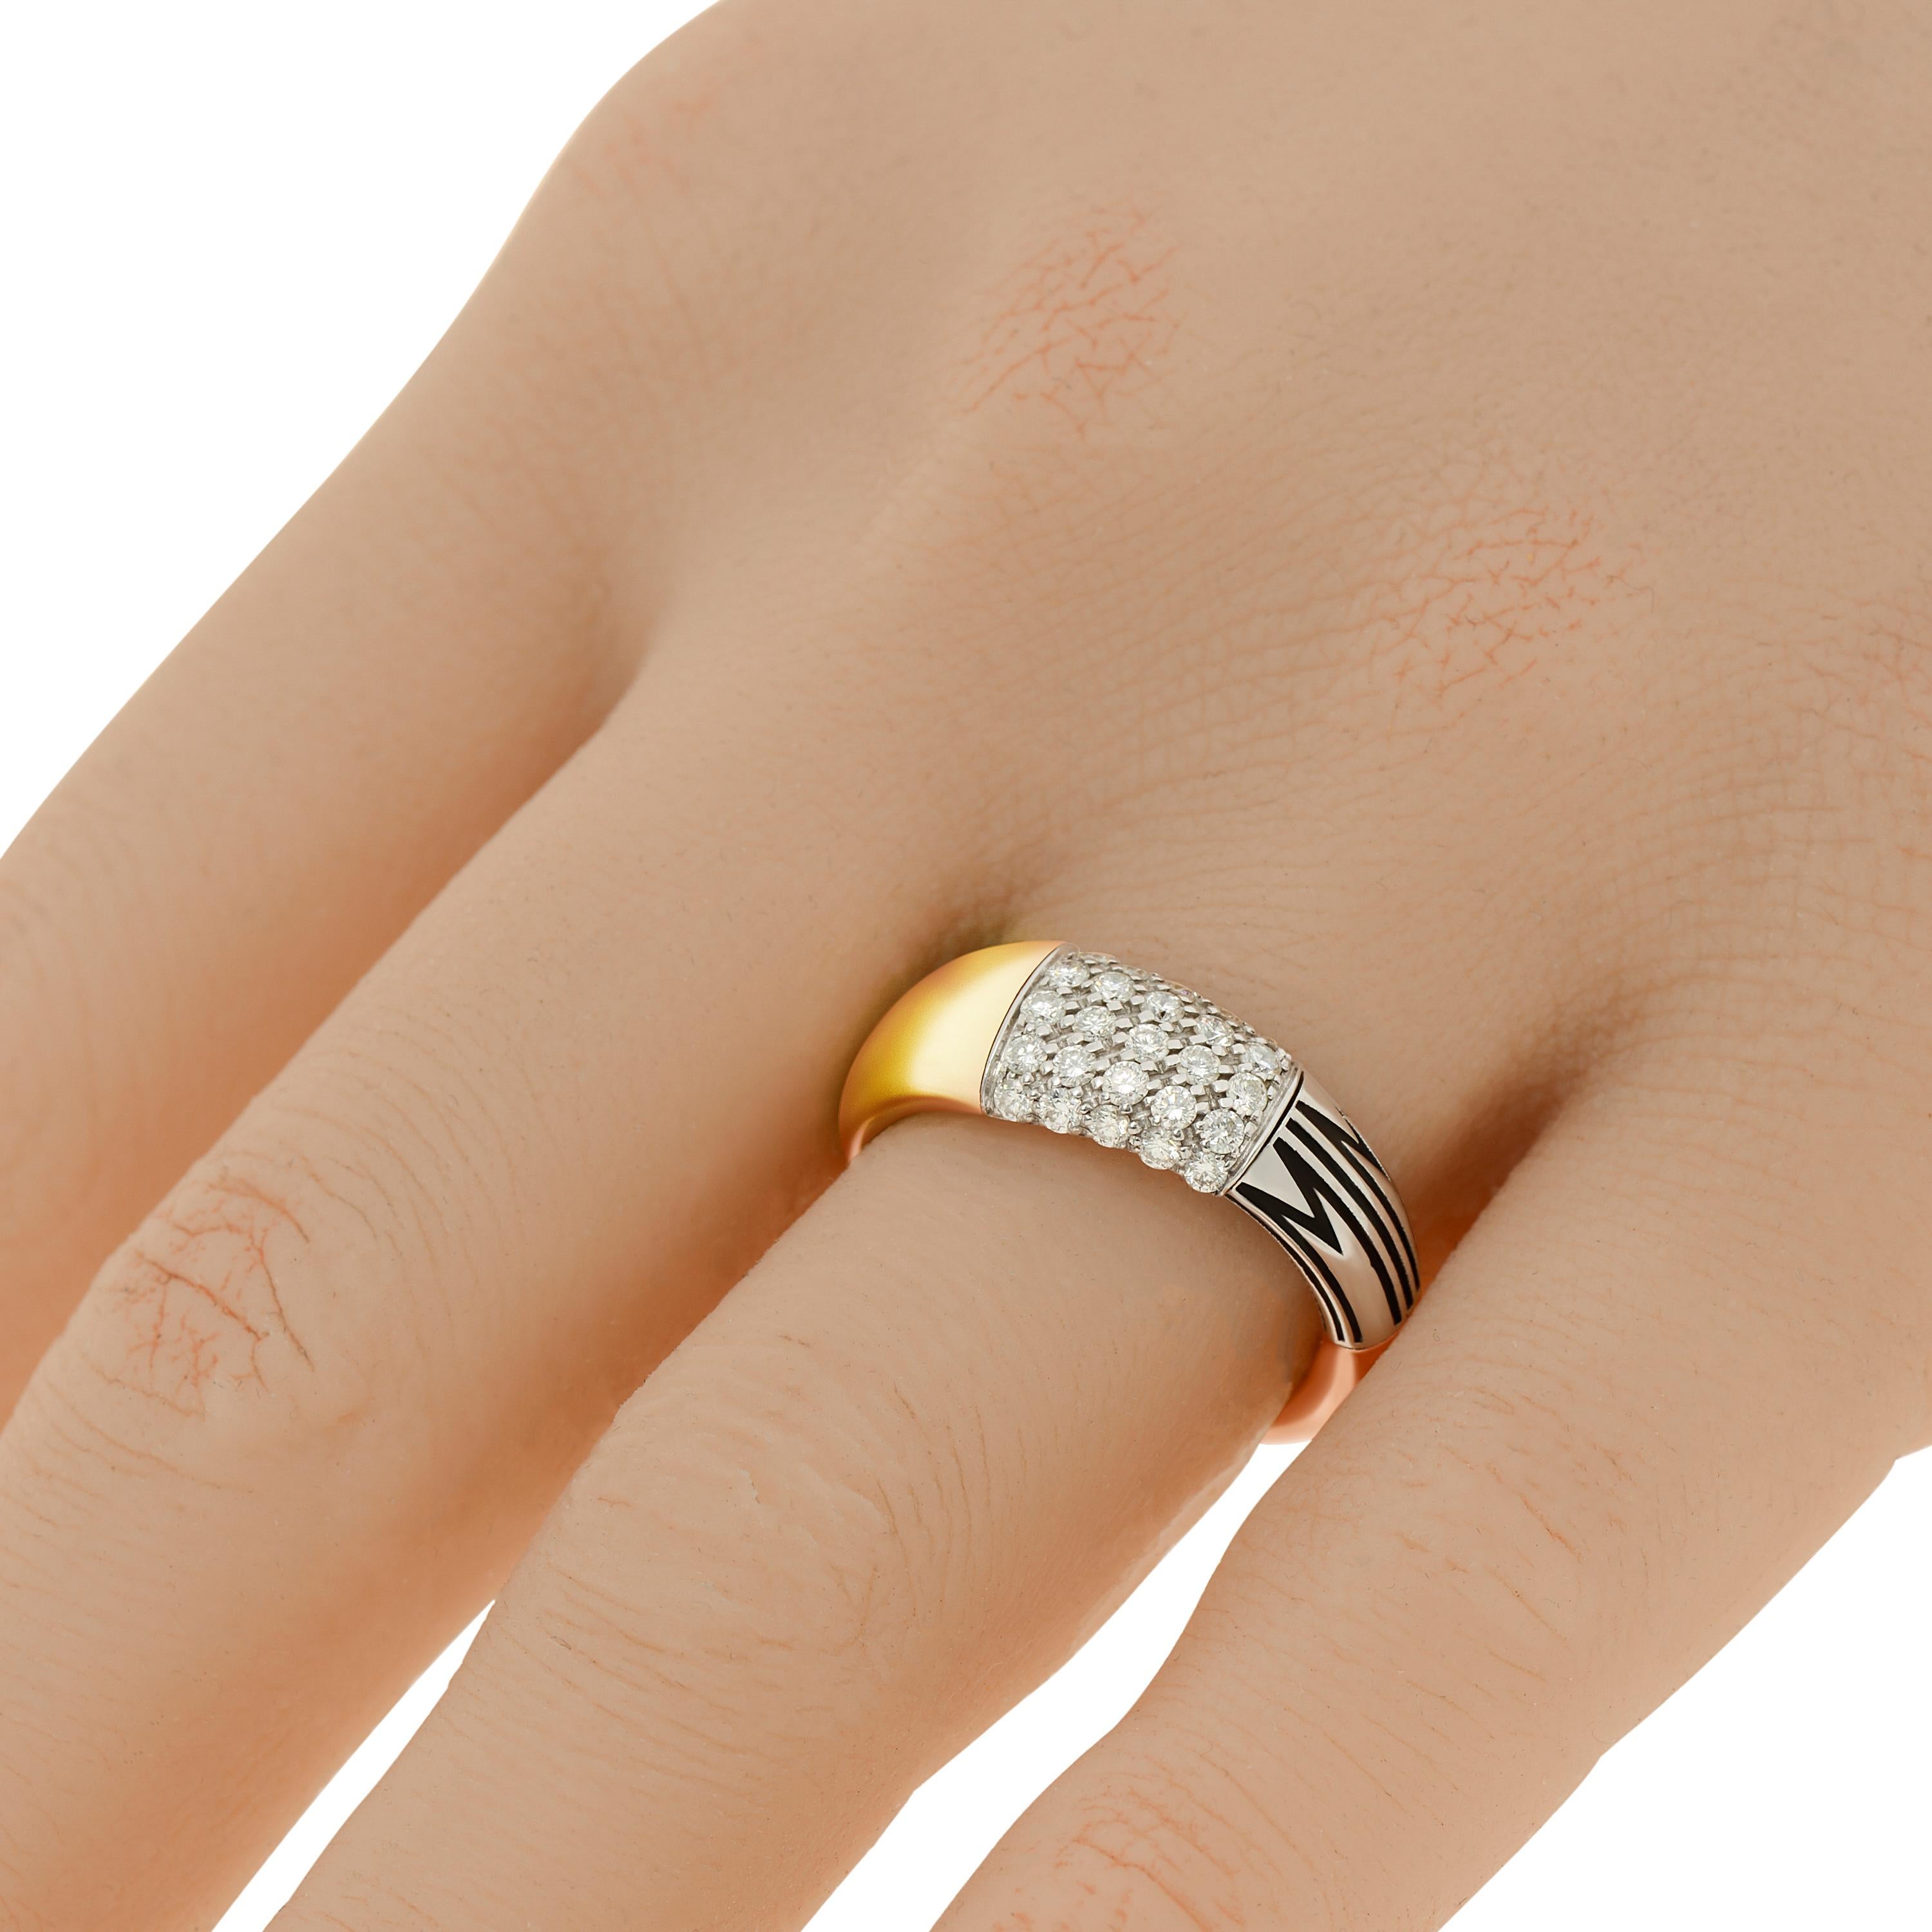 Mimi Milano Tam Tam 18k yellow gold and 18k white gold band ring features 0.55ct. tw. diamonds set in a two toned band. The ring size is 7 (54.4). The band width is 1/4